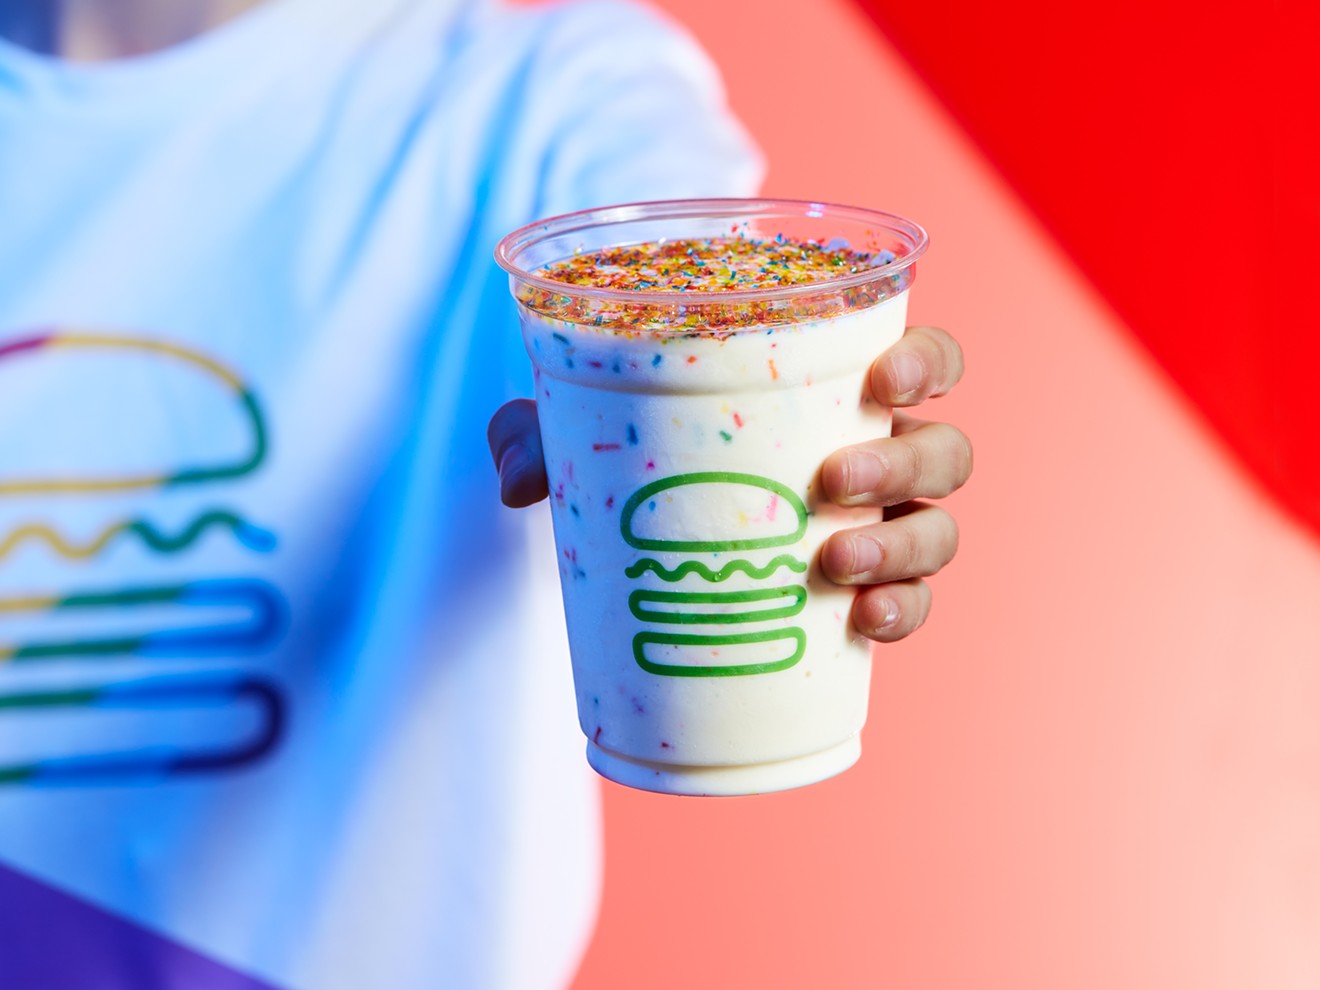 Taste the Pride Shake, a cake batter shake topped with rainbow glitter sprinkles, throughout the month of June.